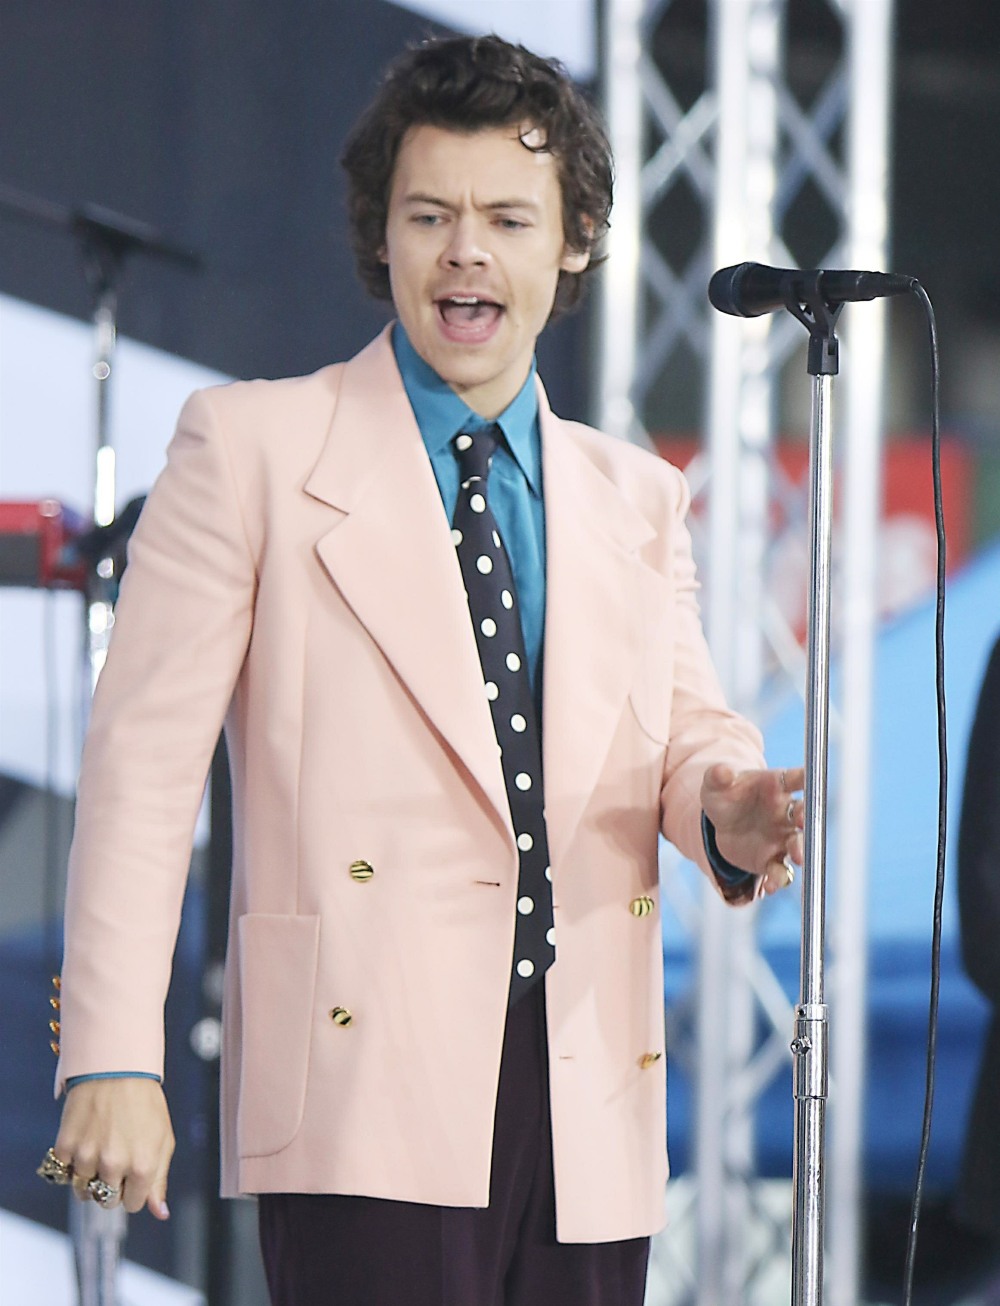 Harry Styles performs during the Today Show Concert Series